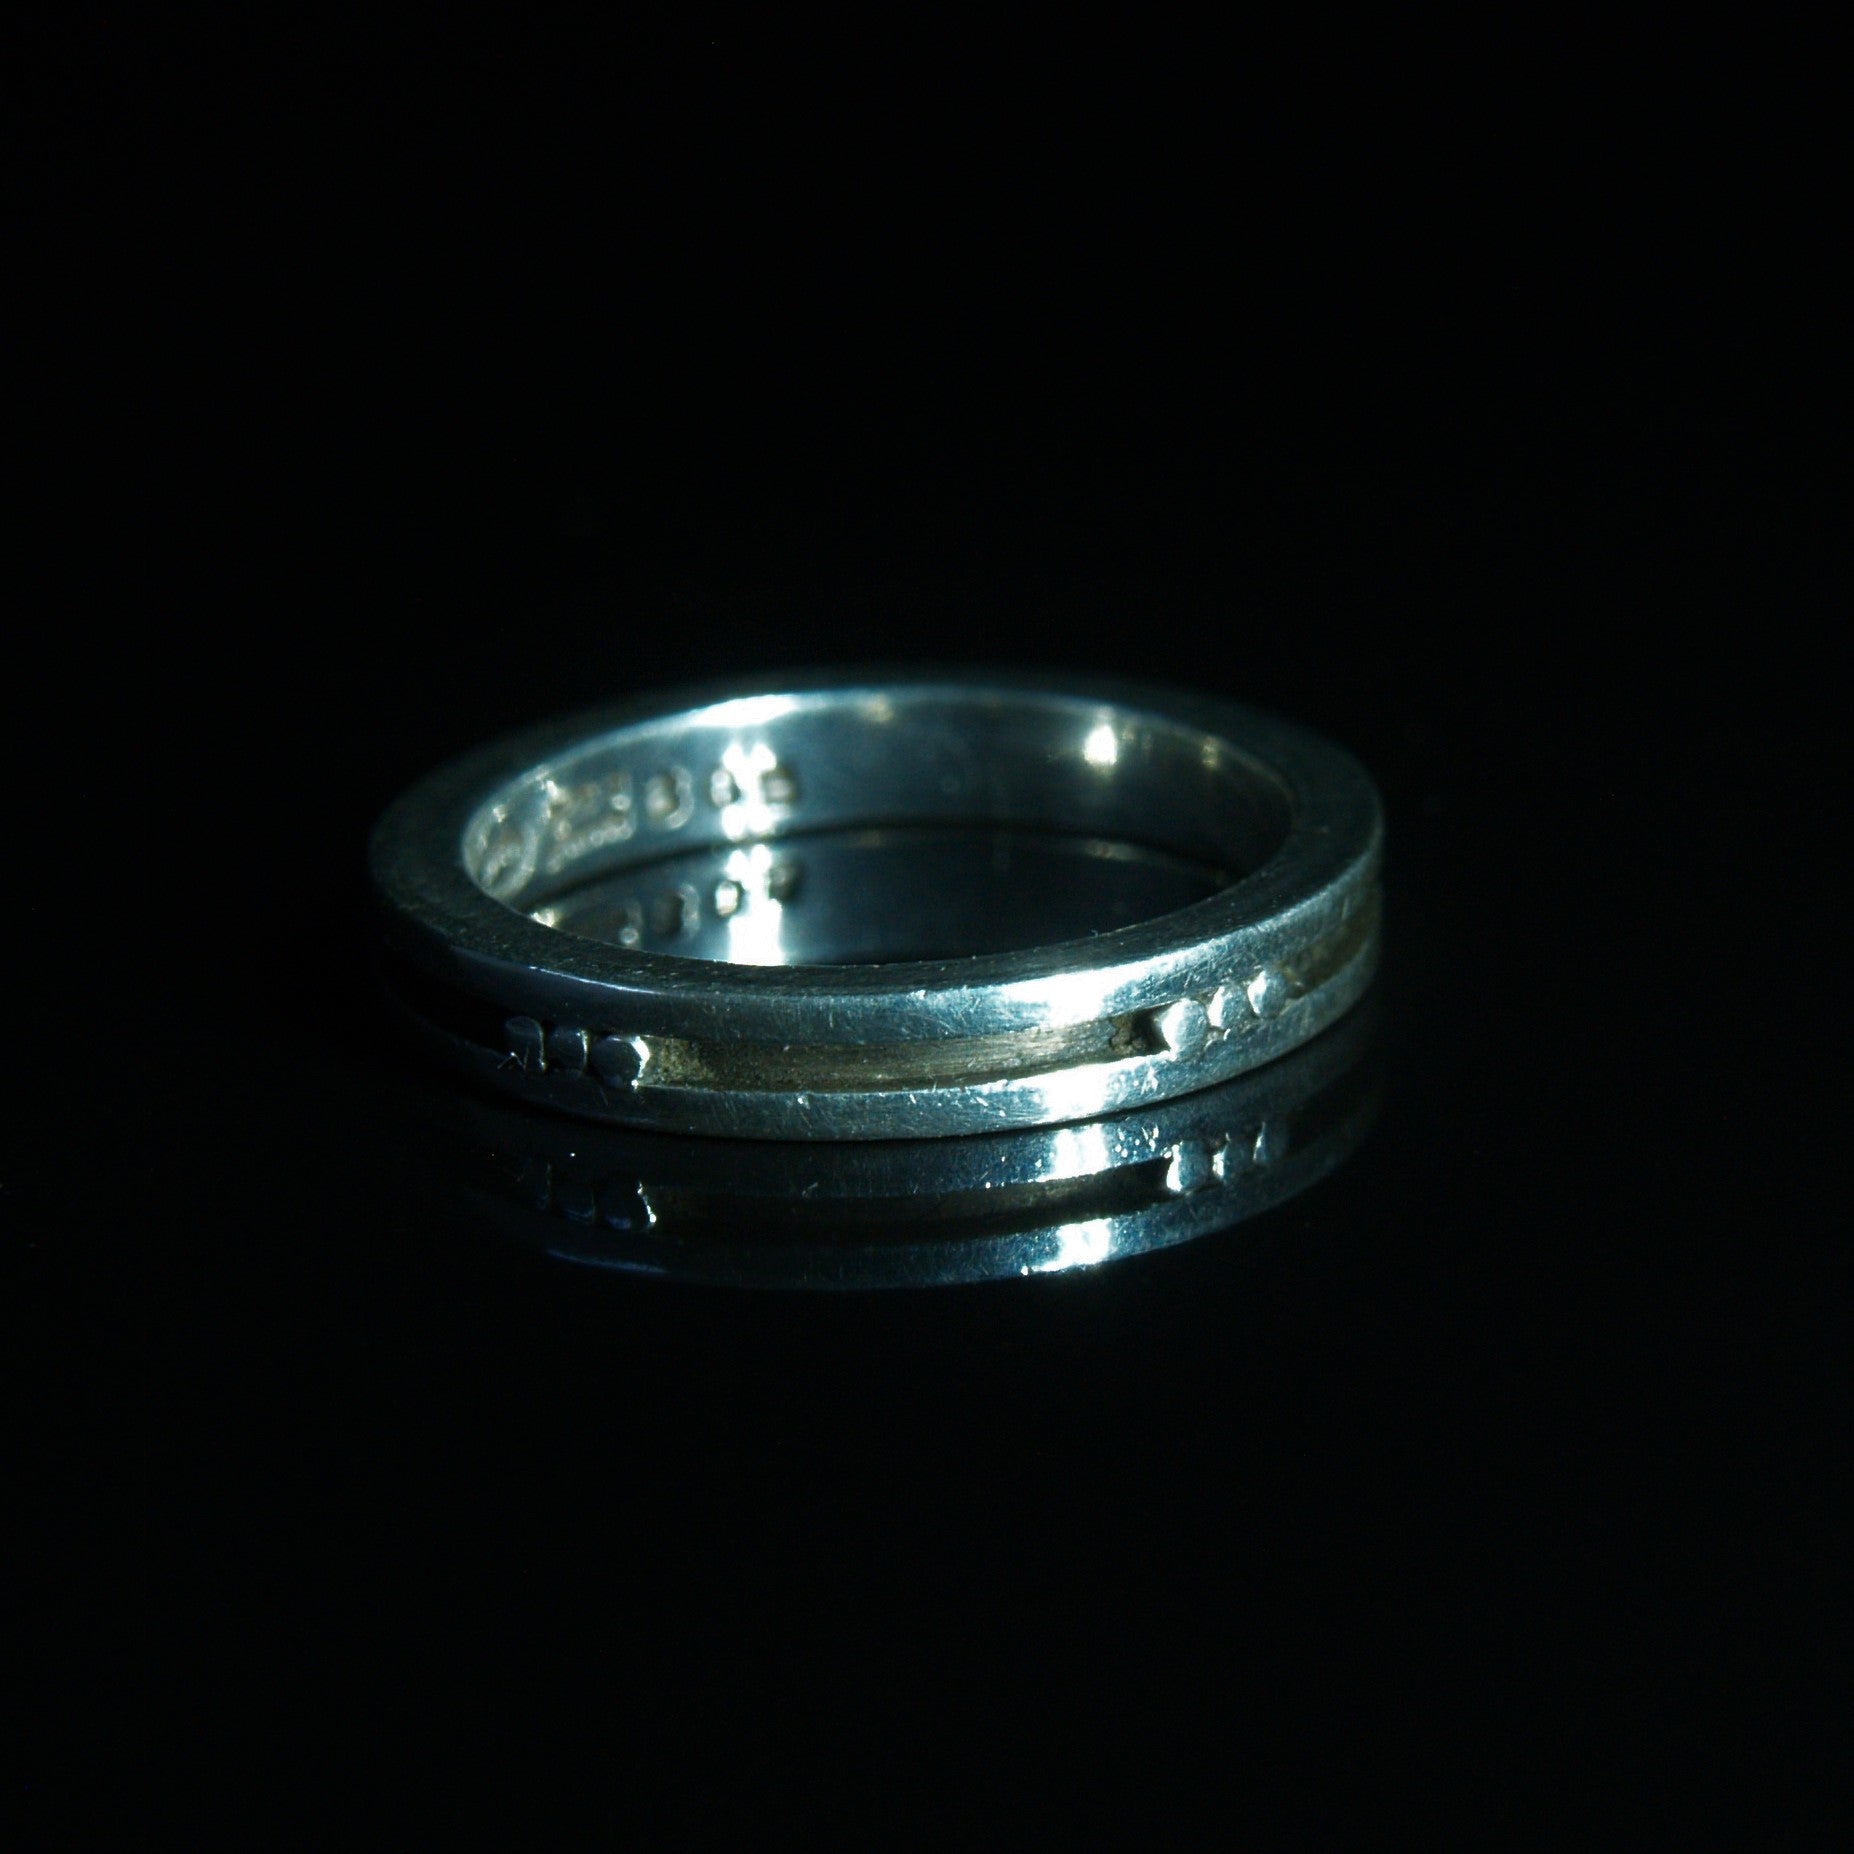 Georg Jensen Silver 'His & Hers' Wedding Band Size I or 4 1/4 USA.